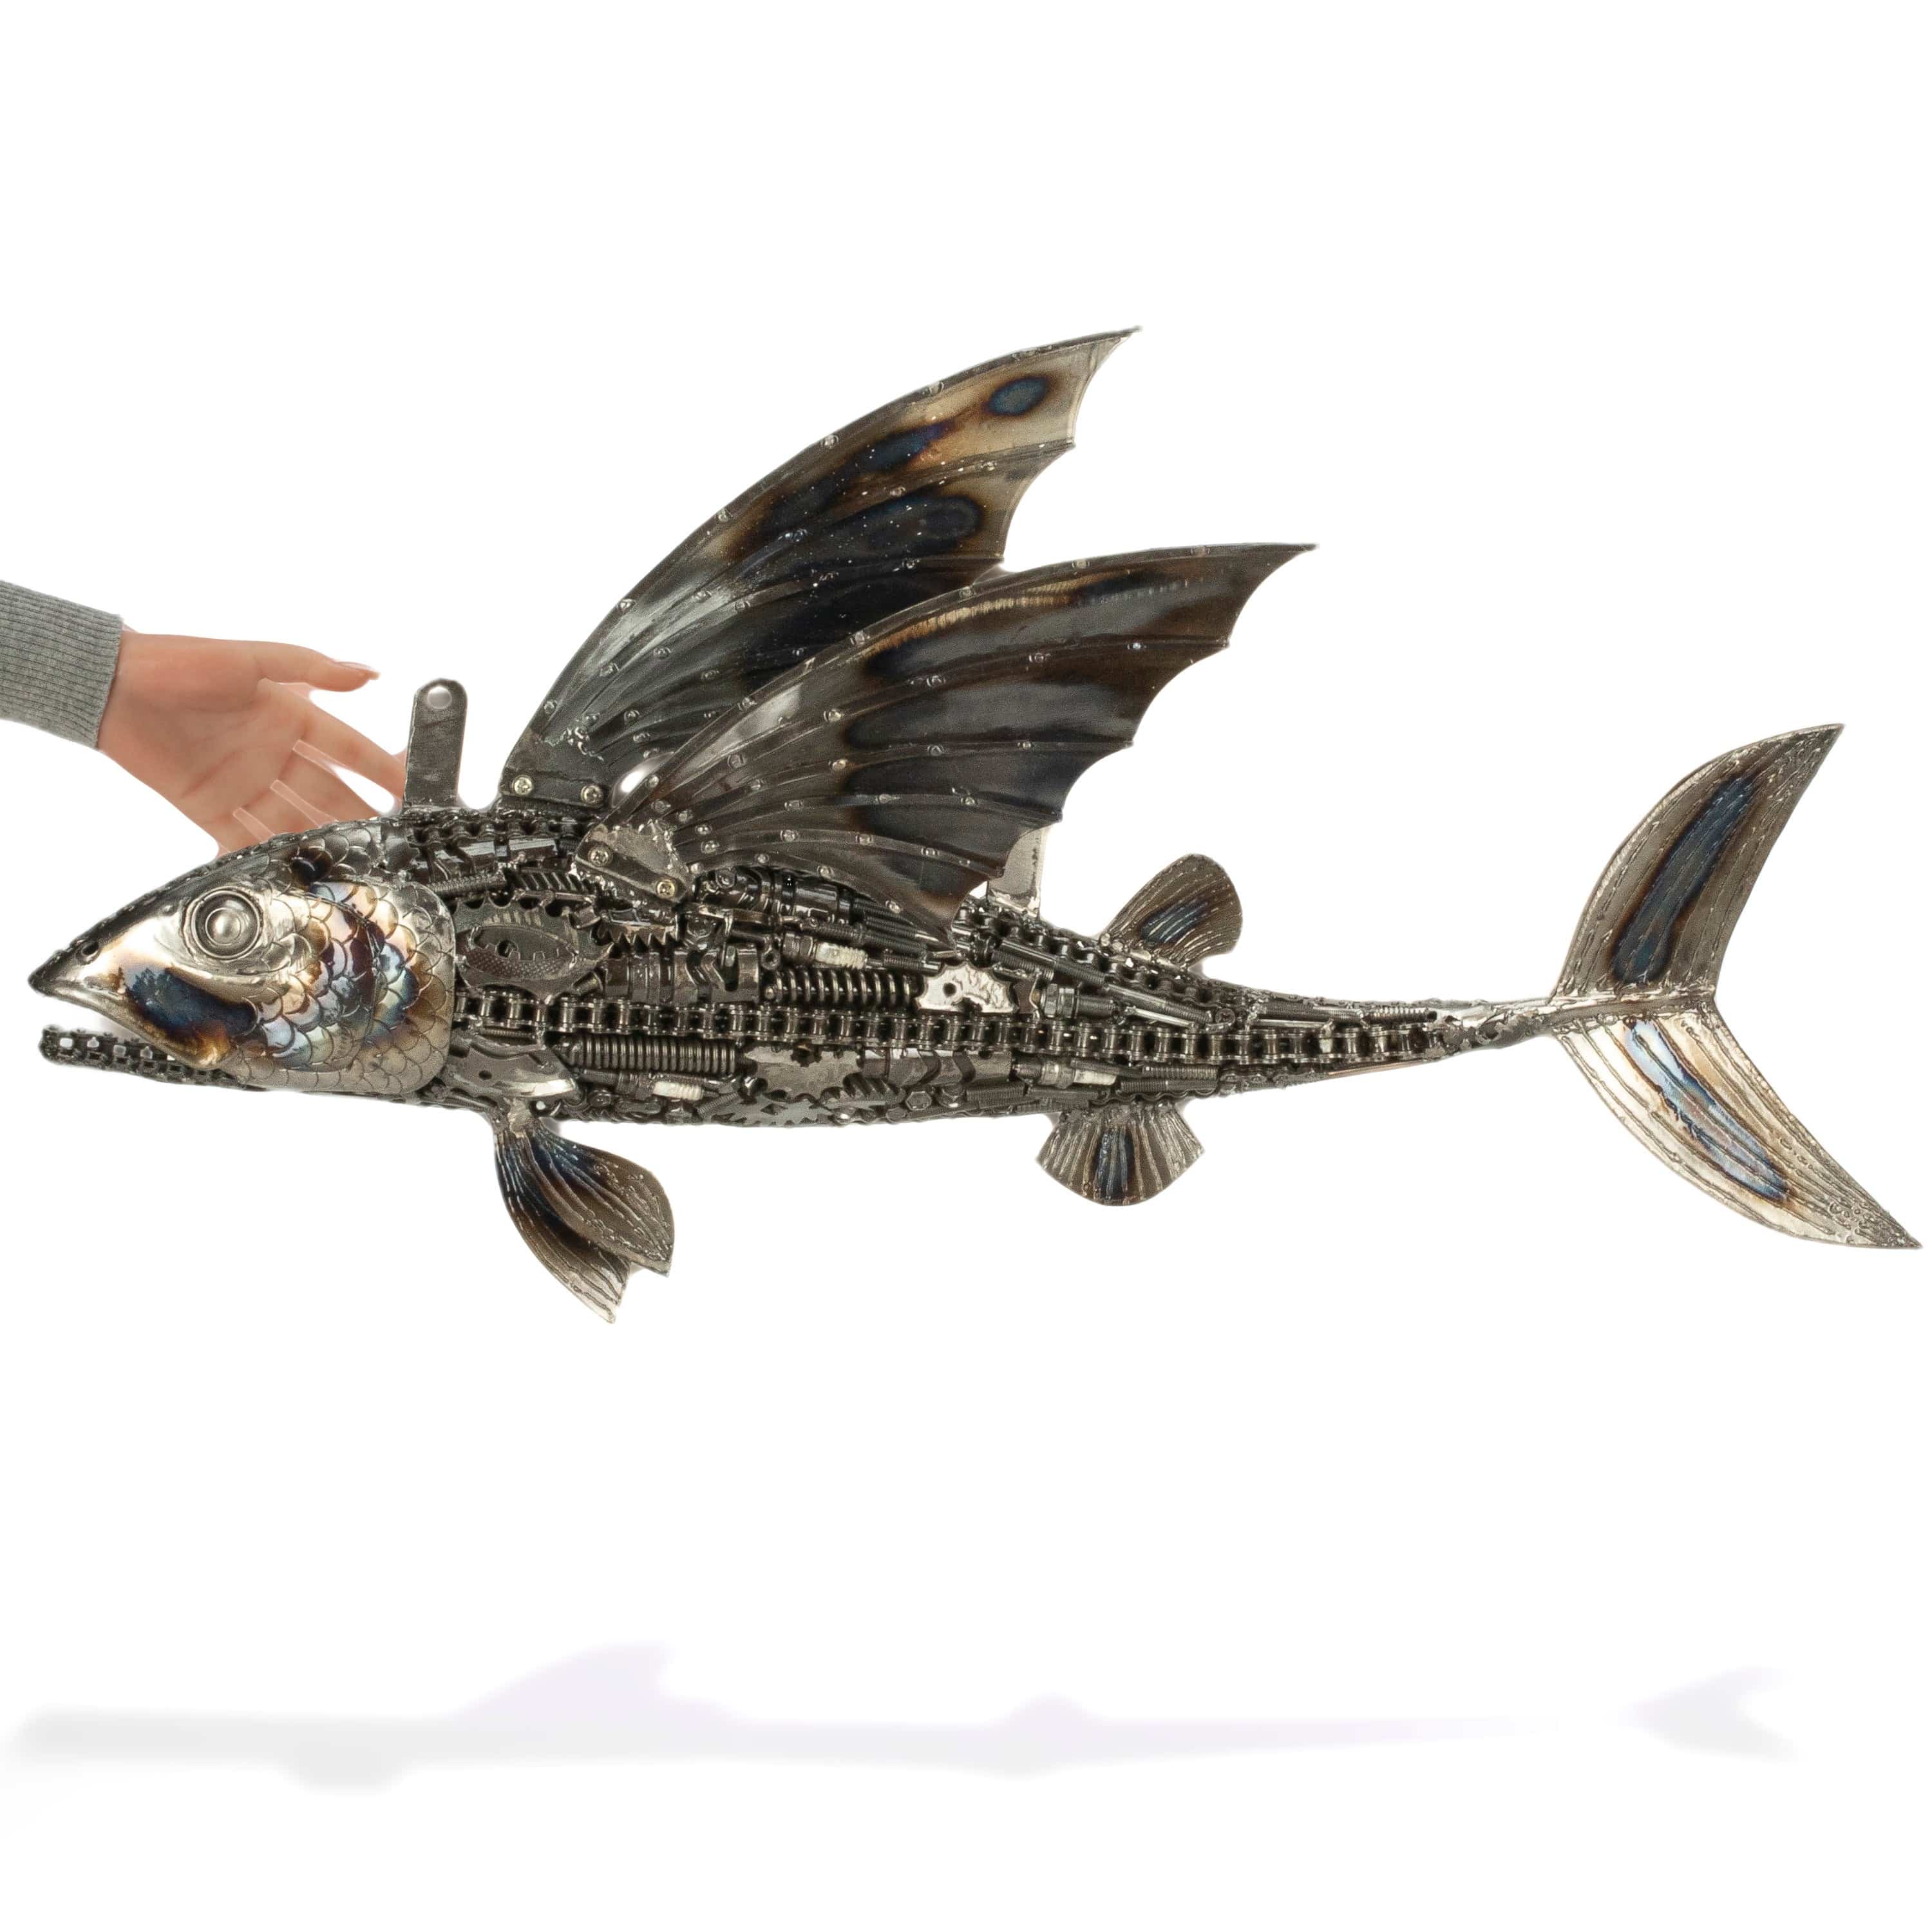 KALIFANO Recycled Metal Art 35" Flying Fish (Right) Inspired Recycled Metal Art Sculpture RMS-FFR88x55-PK